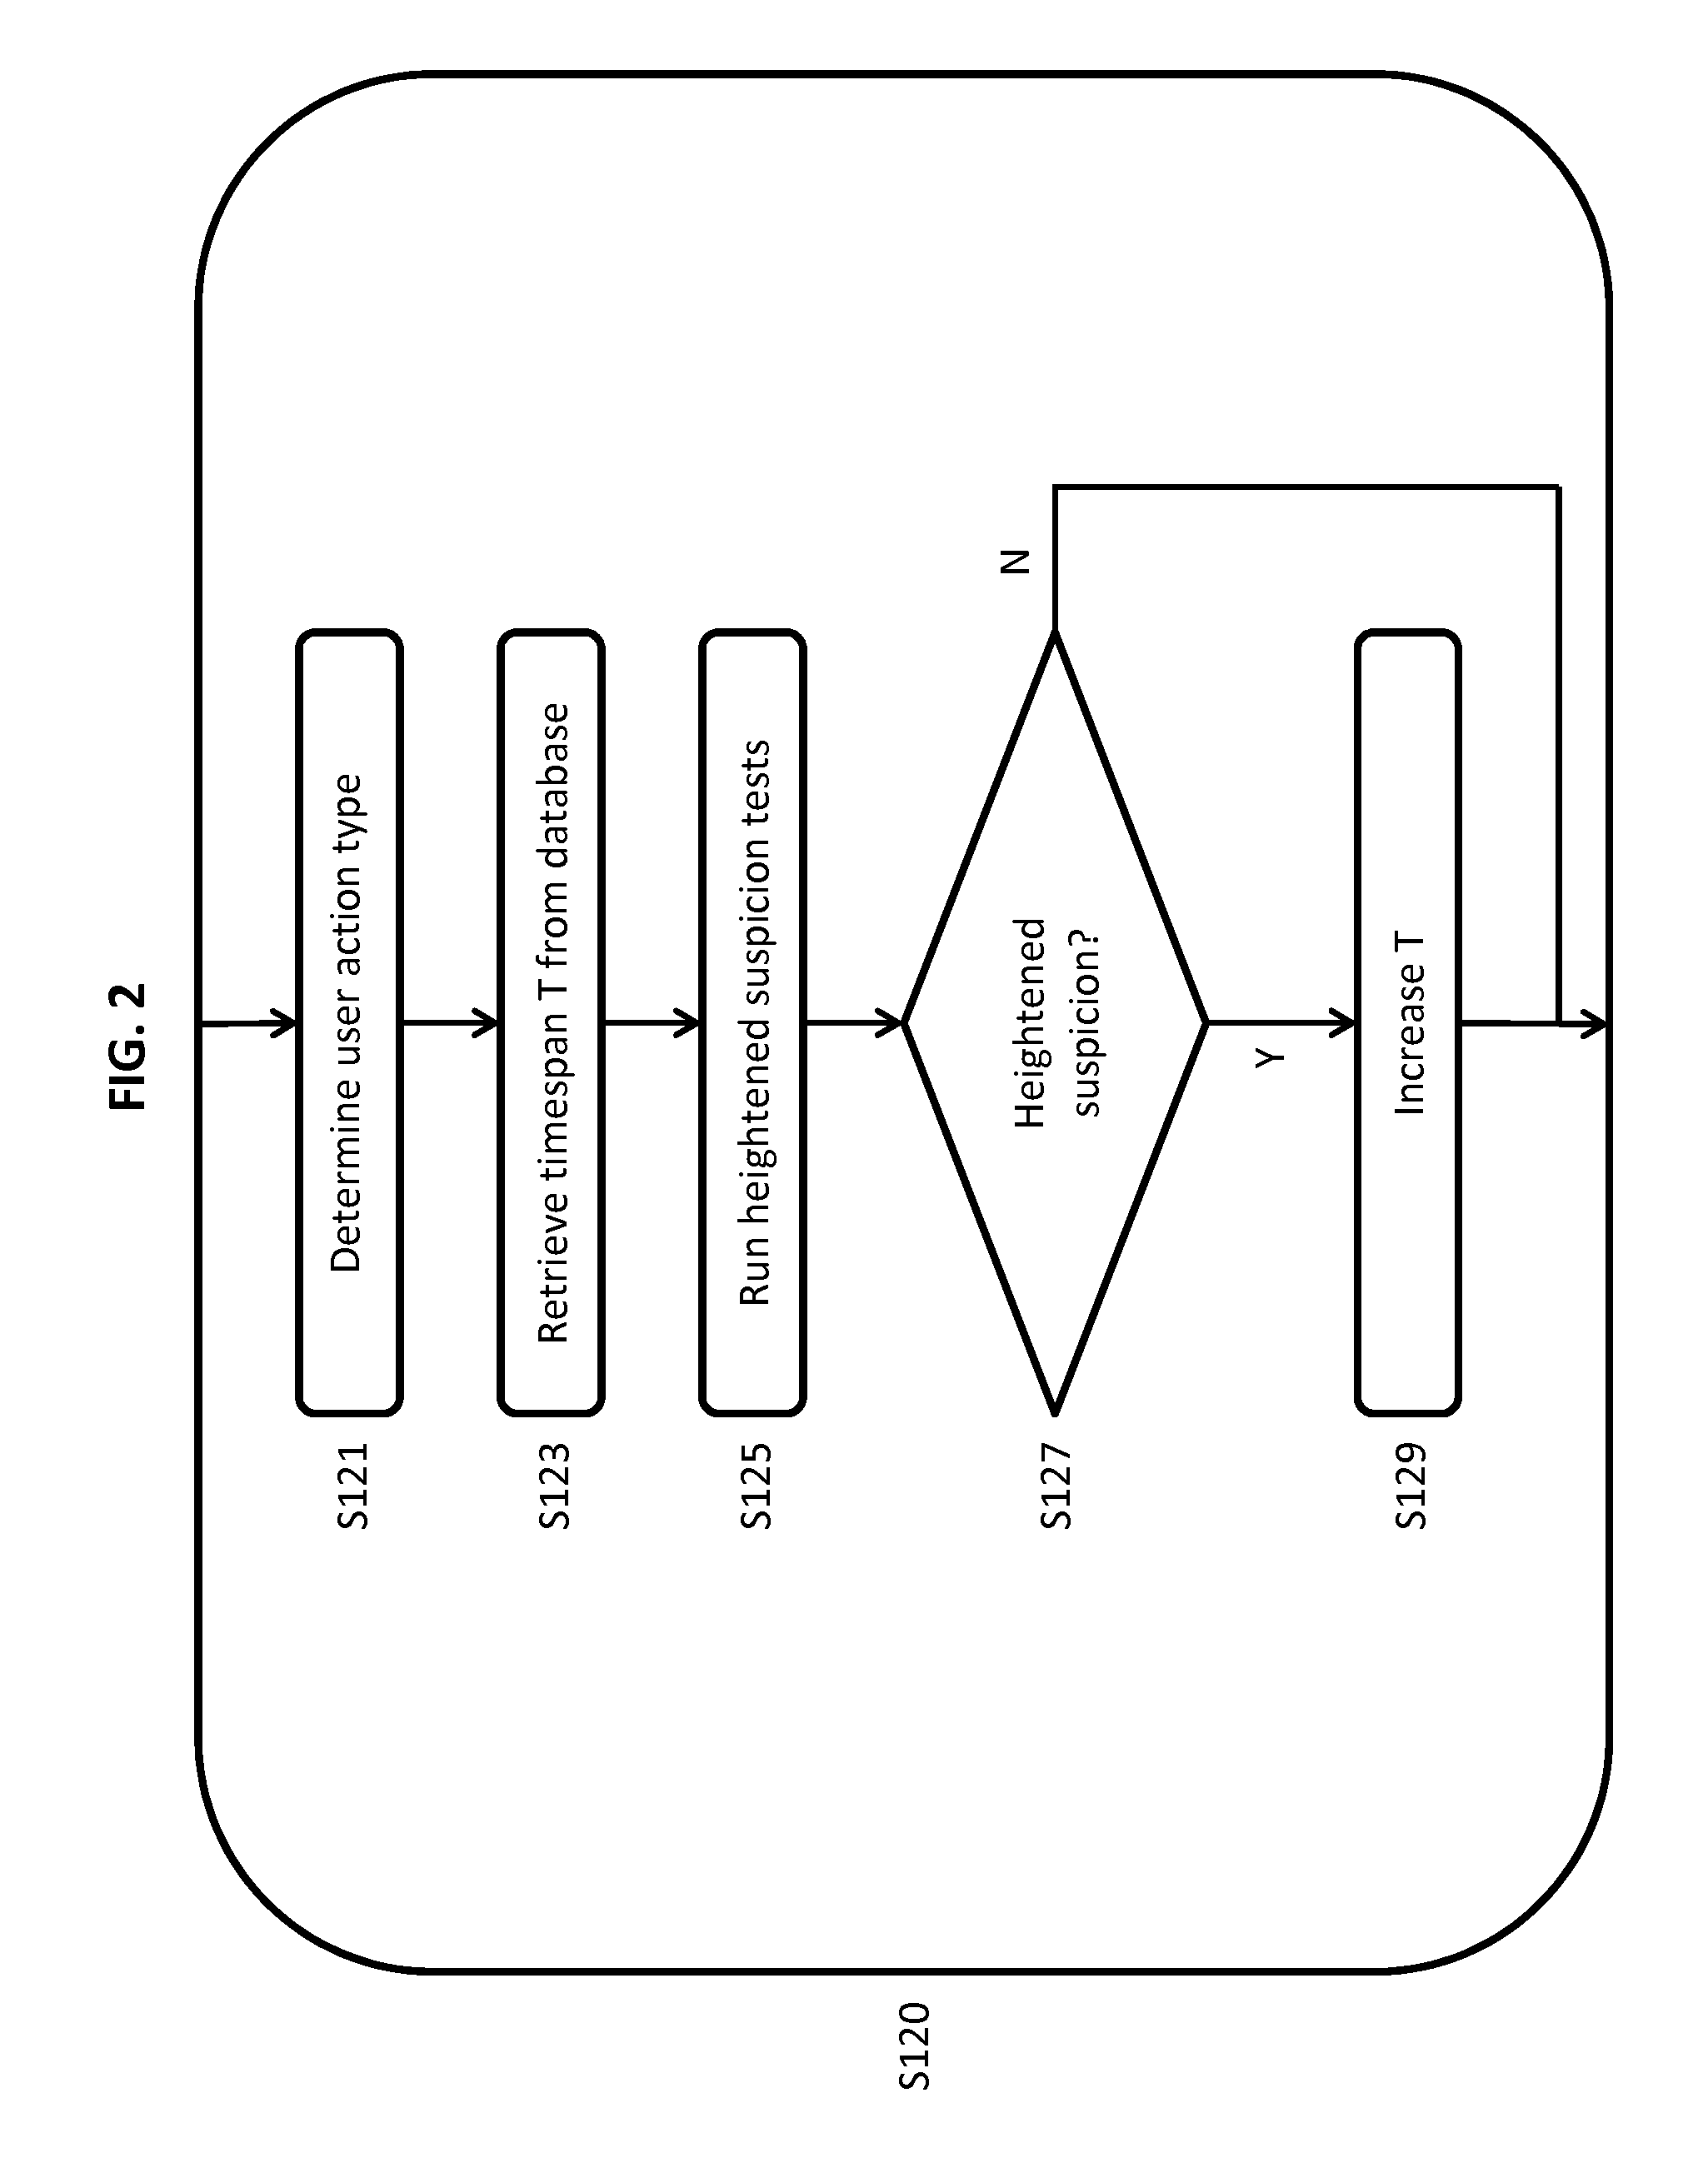 System and Method of Semi-Automated Velocity-Based Social Network Moderation